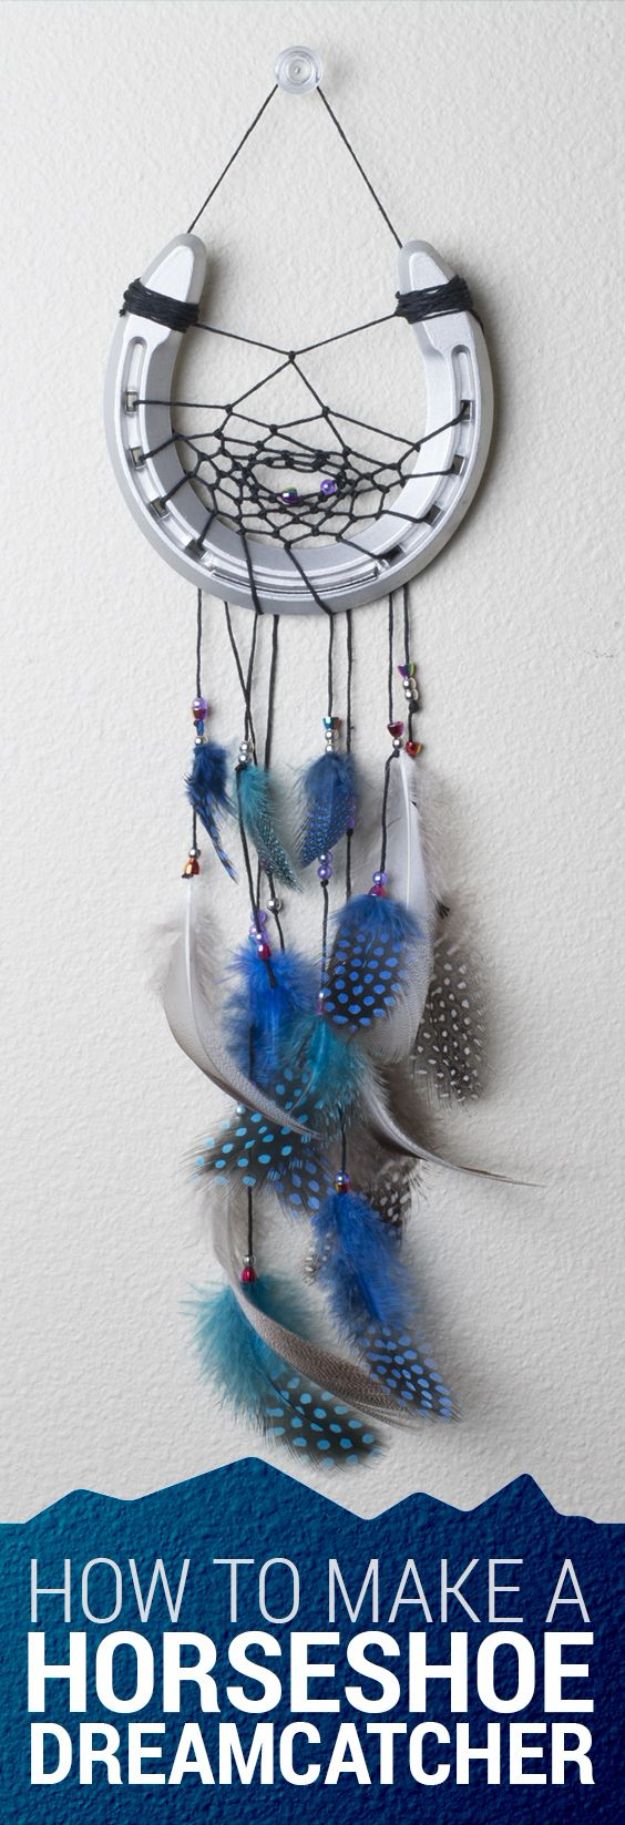 DIY Dream Catchers - Horseshoe Dreamcatcher - How to Make a Dreamcatcher Step by Step Tutorial - Easy Ideas for Dream Catcher for Kids Room - Make a Mobile, Moon Designs, Pattern Ideas, Boho Dreamcatcher With Sticks, Cool Wall Hangings for Teen Rooms - Cheap Home Decor Ideas on A Budget #diyideas #teencrafts #dreamcatchers